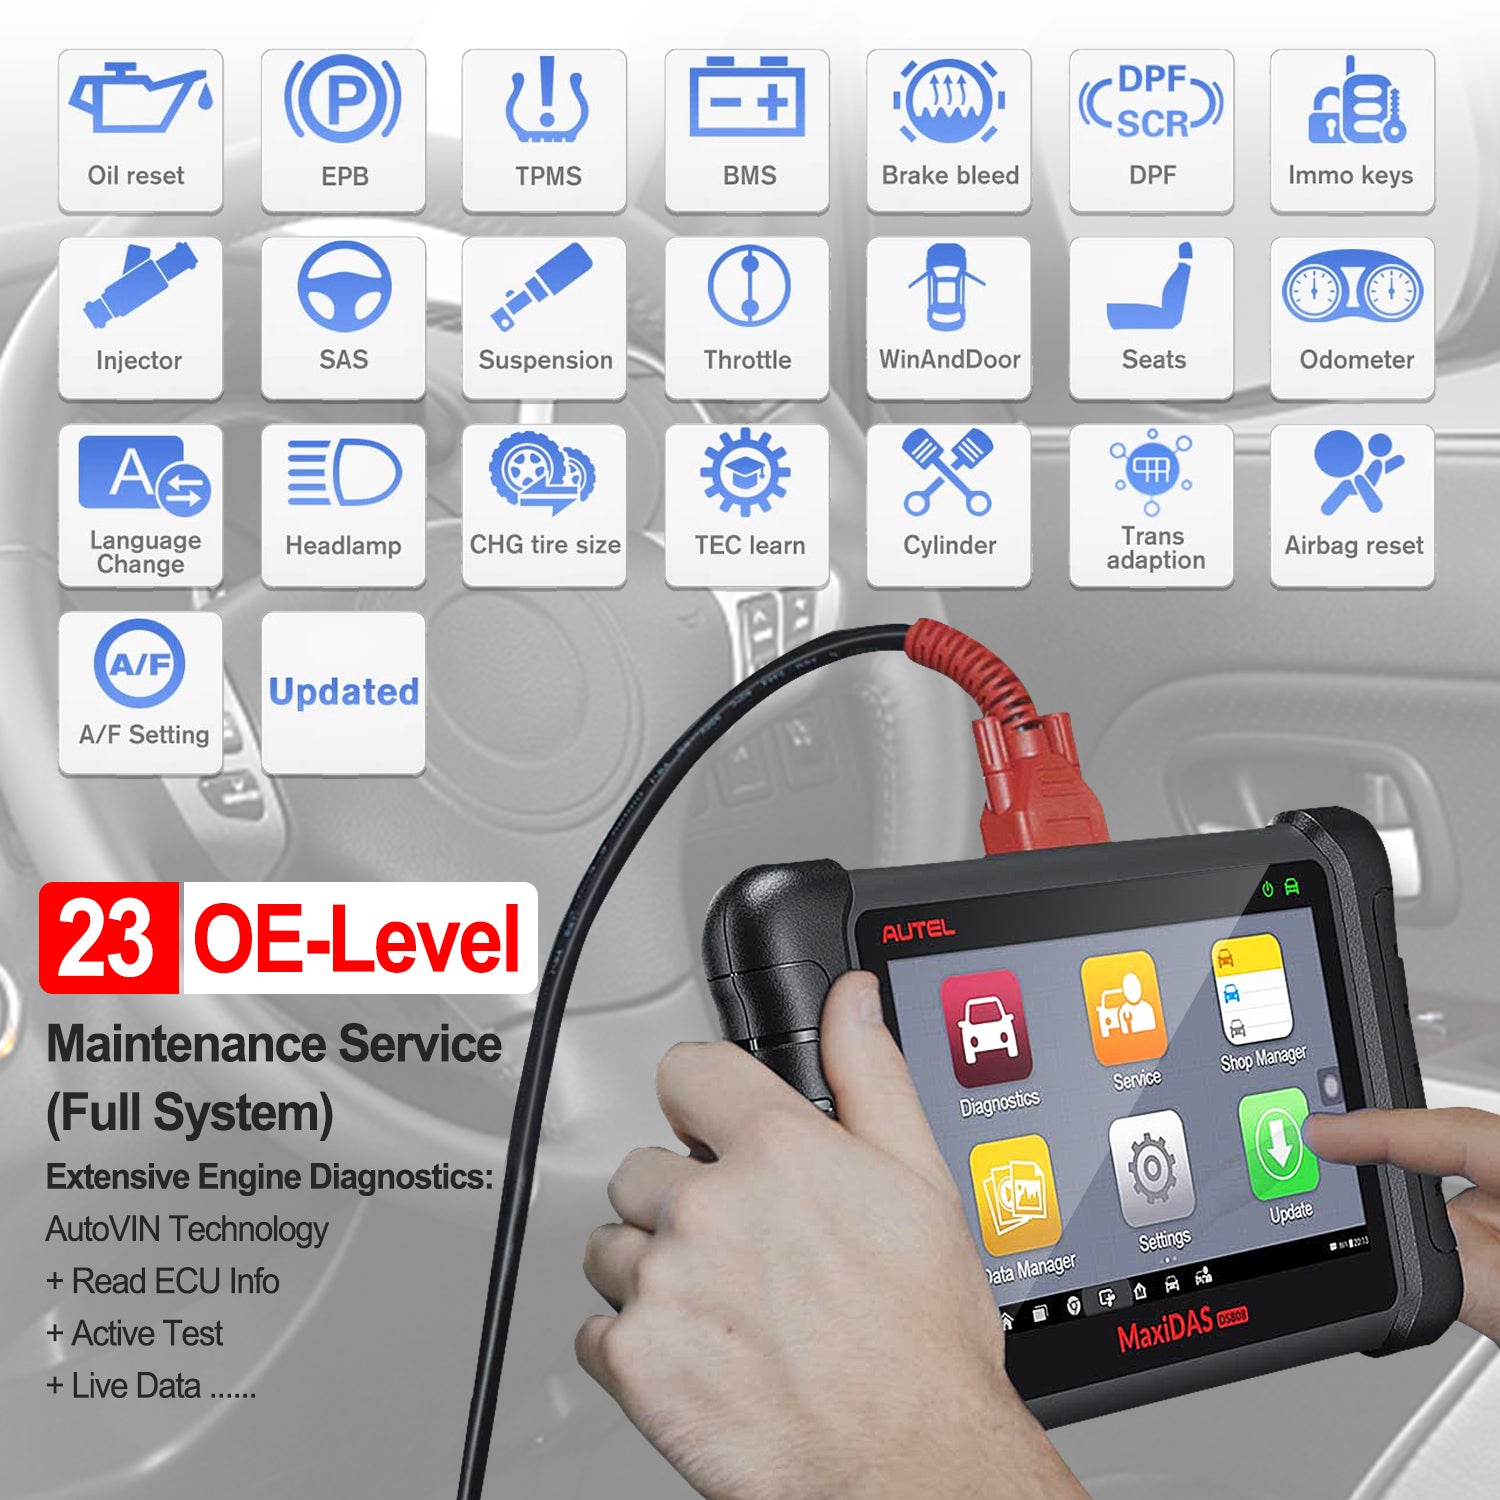 Autel MaxiDAS DS808K Vehicle Diagnostic Scan Tool, Upgrated of MP808/ DS808/ DS708 Tools, OE All Systems Diagnosis, Oil Reset and Bi-Directional Control Functions